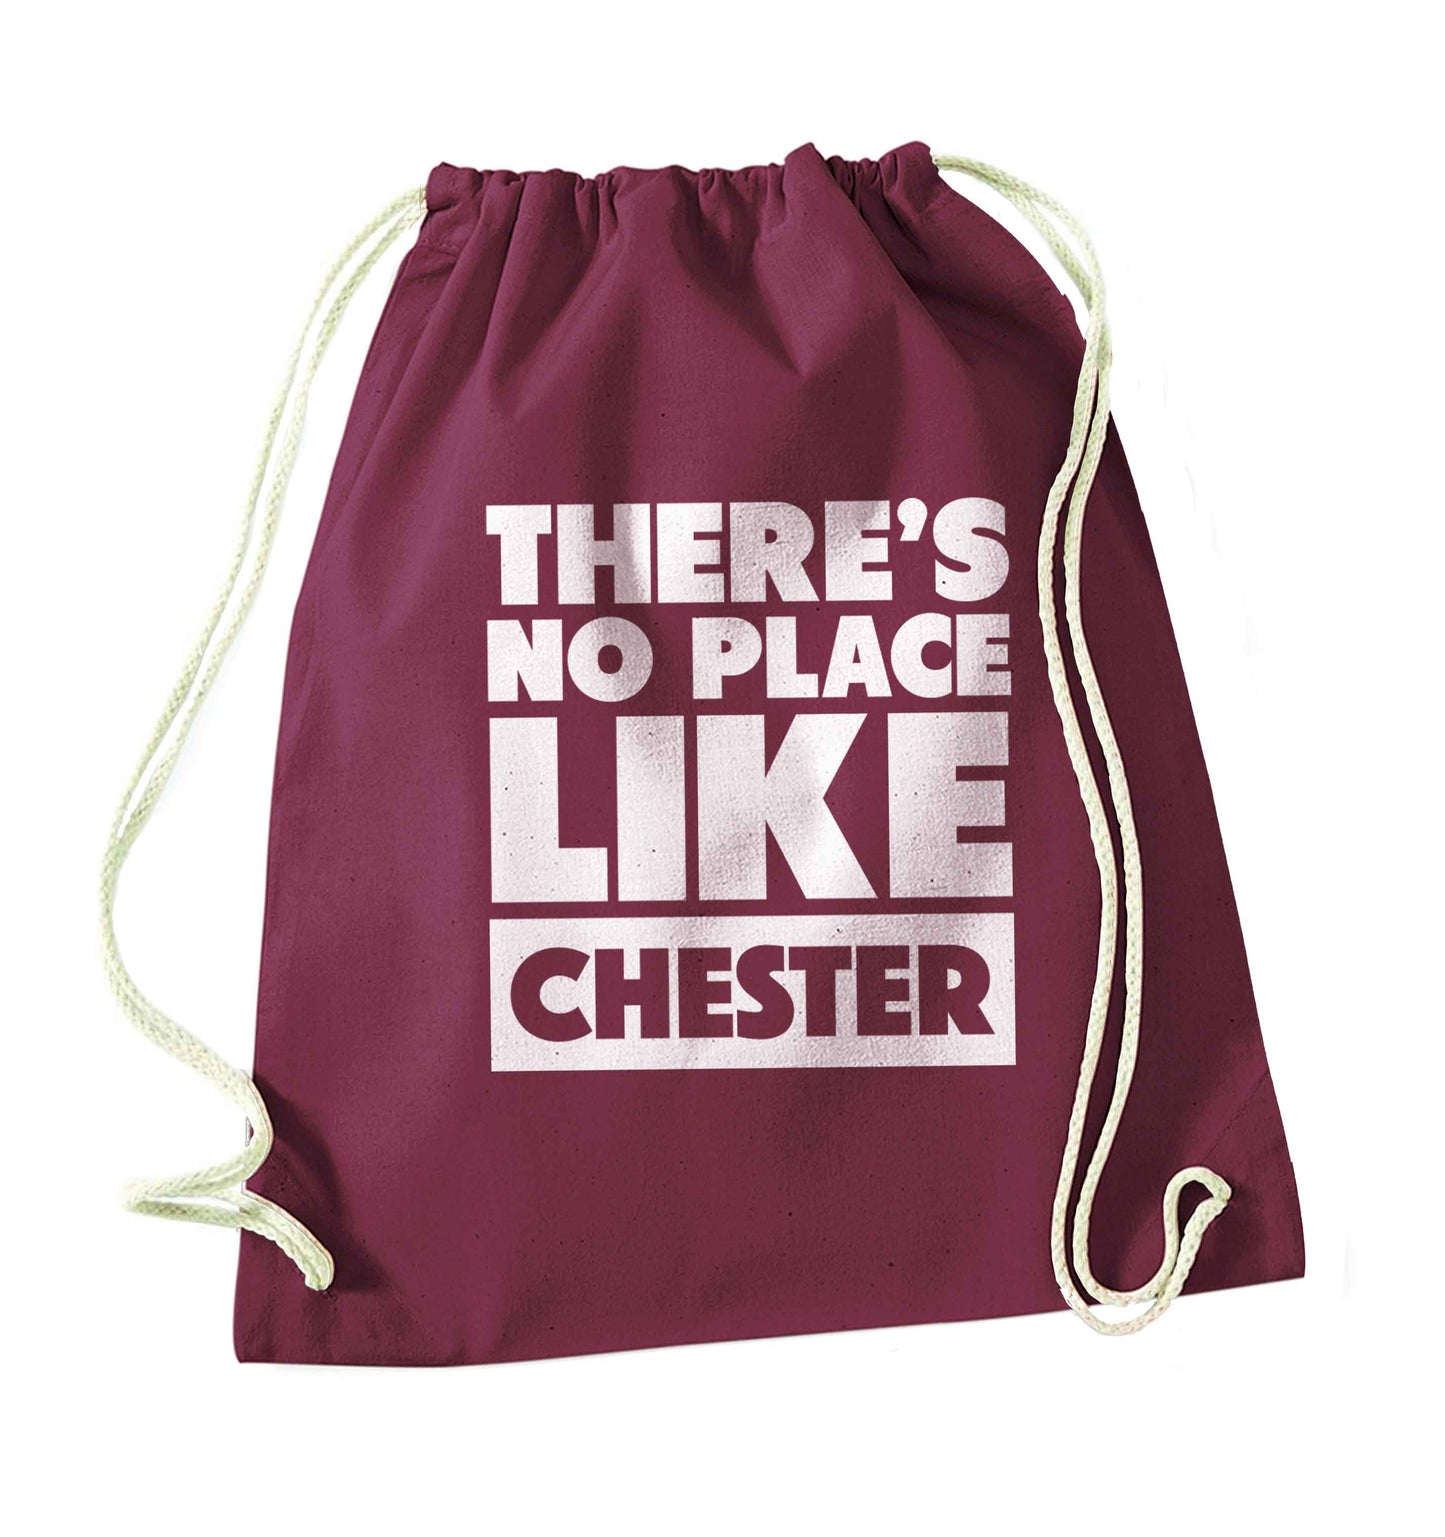 There's no place like Chester maroon drawstring bag